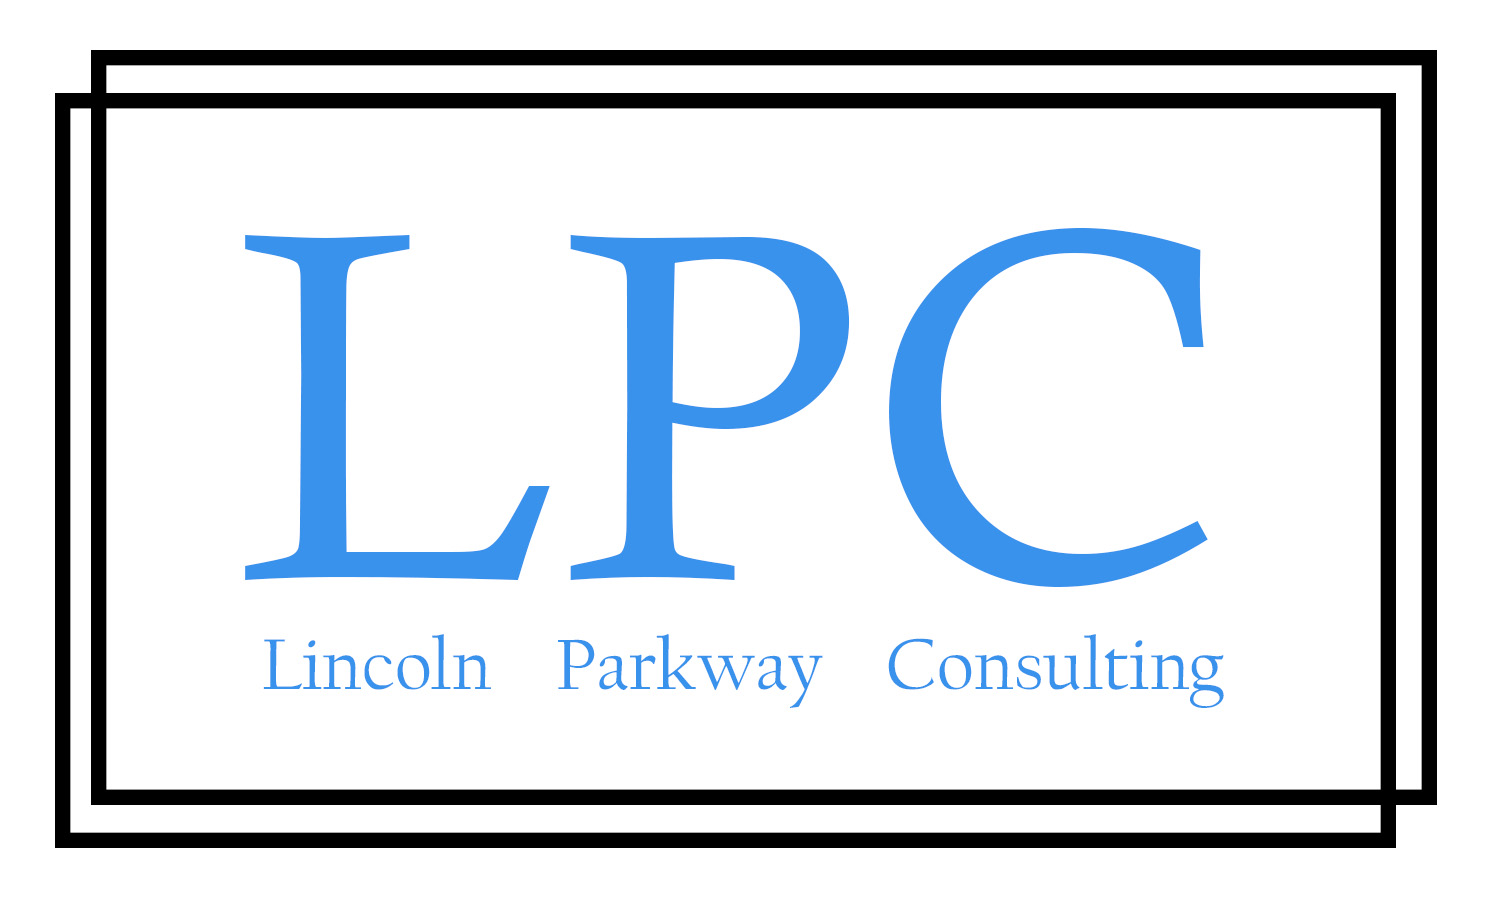 Lincoln Parkway Consulting